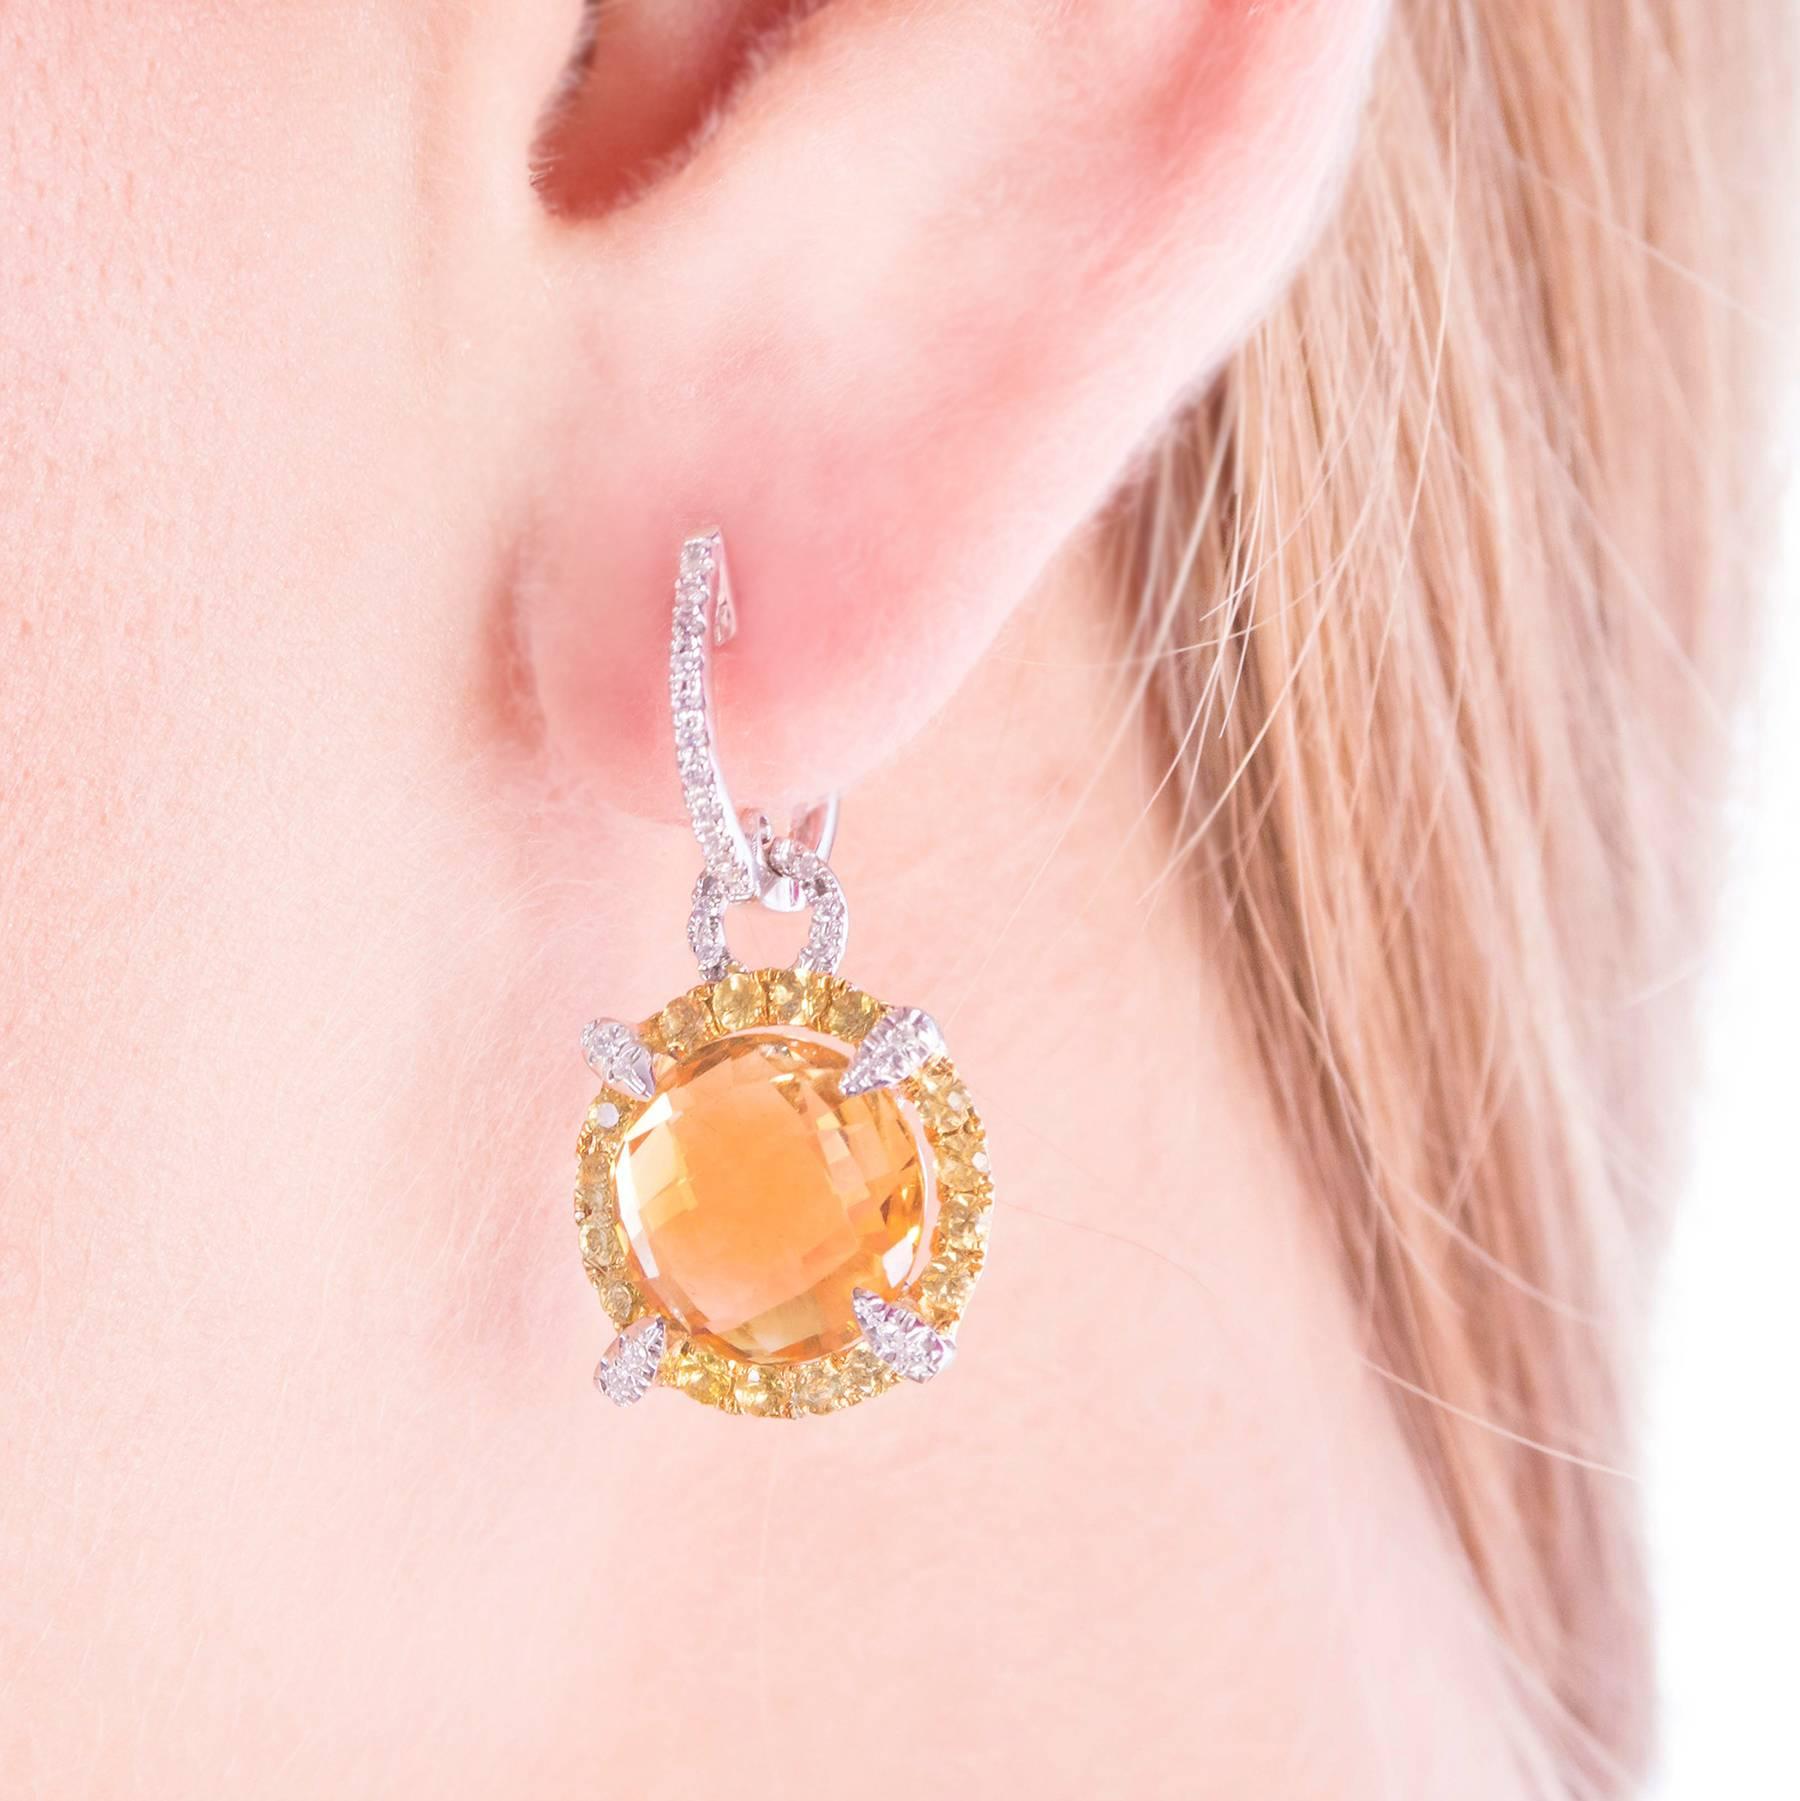 These pretty 18 Karat White Gold and Diamond Earrings are center set with round, faceted Citrines measuring 10.80 mm, equaling approximately 4 carats each. The Citrines are surrounded with bead set Yellow Sapphires/Corundums accented with and